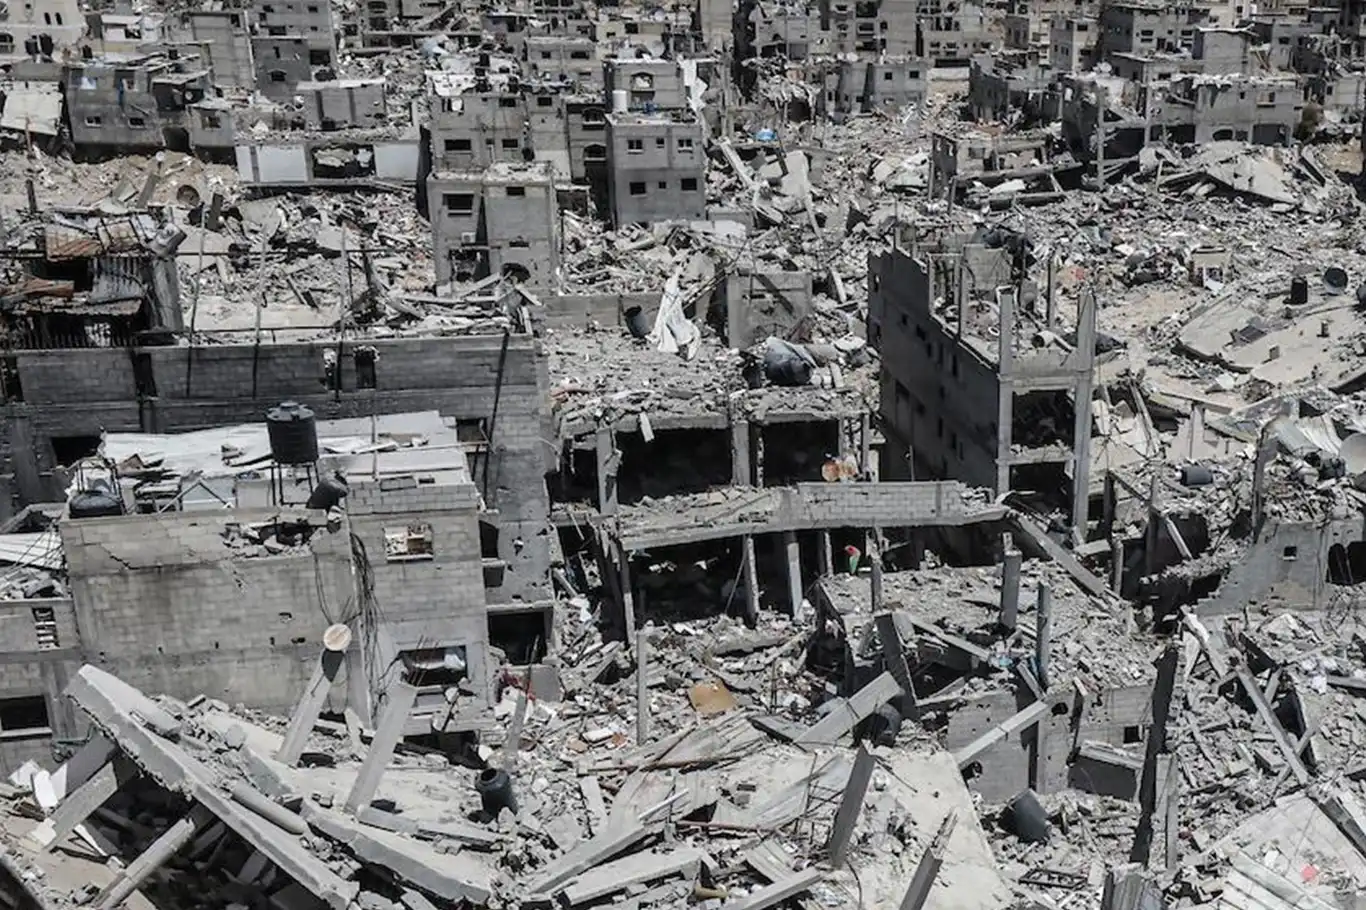 UNRWA: Gaza devastated after 200 days of aggression, reconstruction will take years